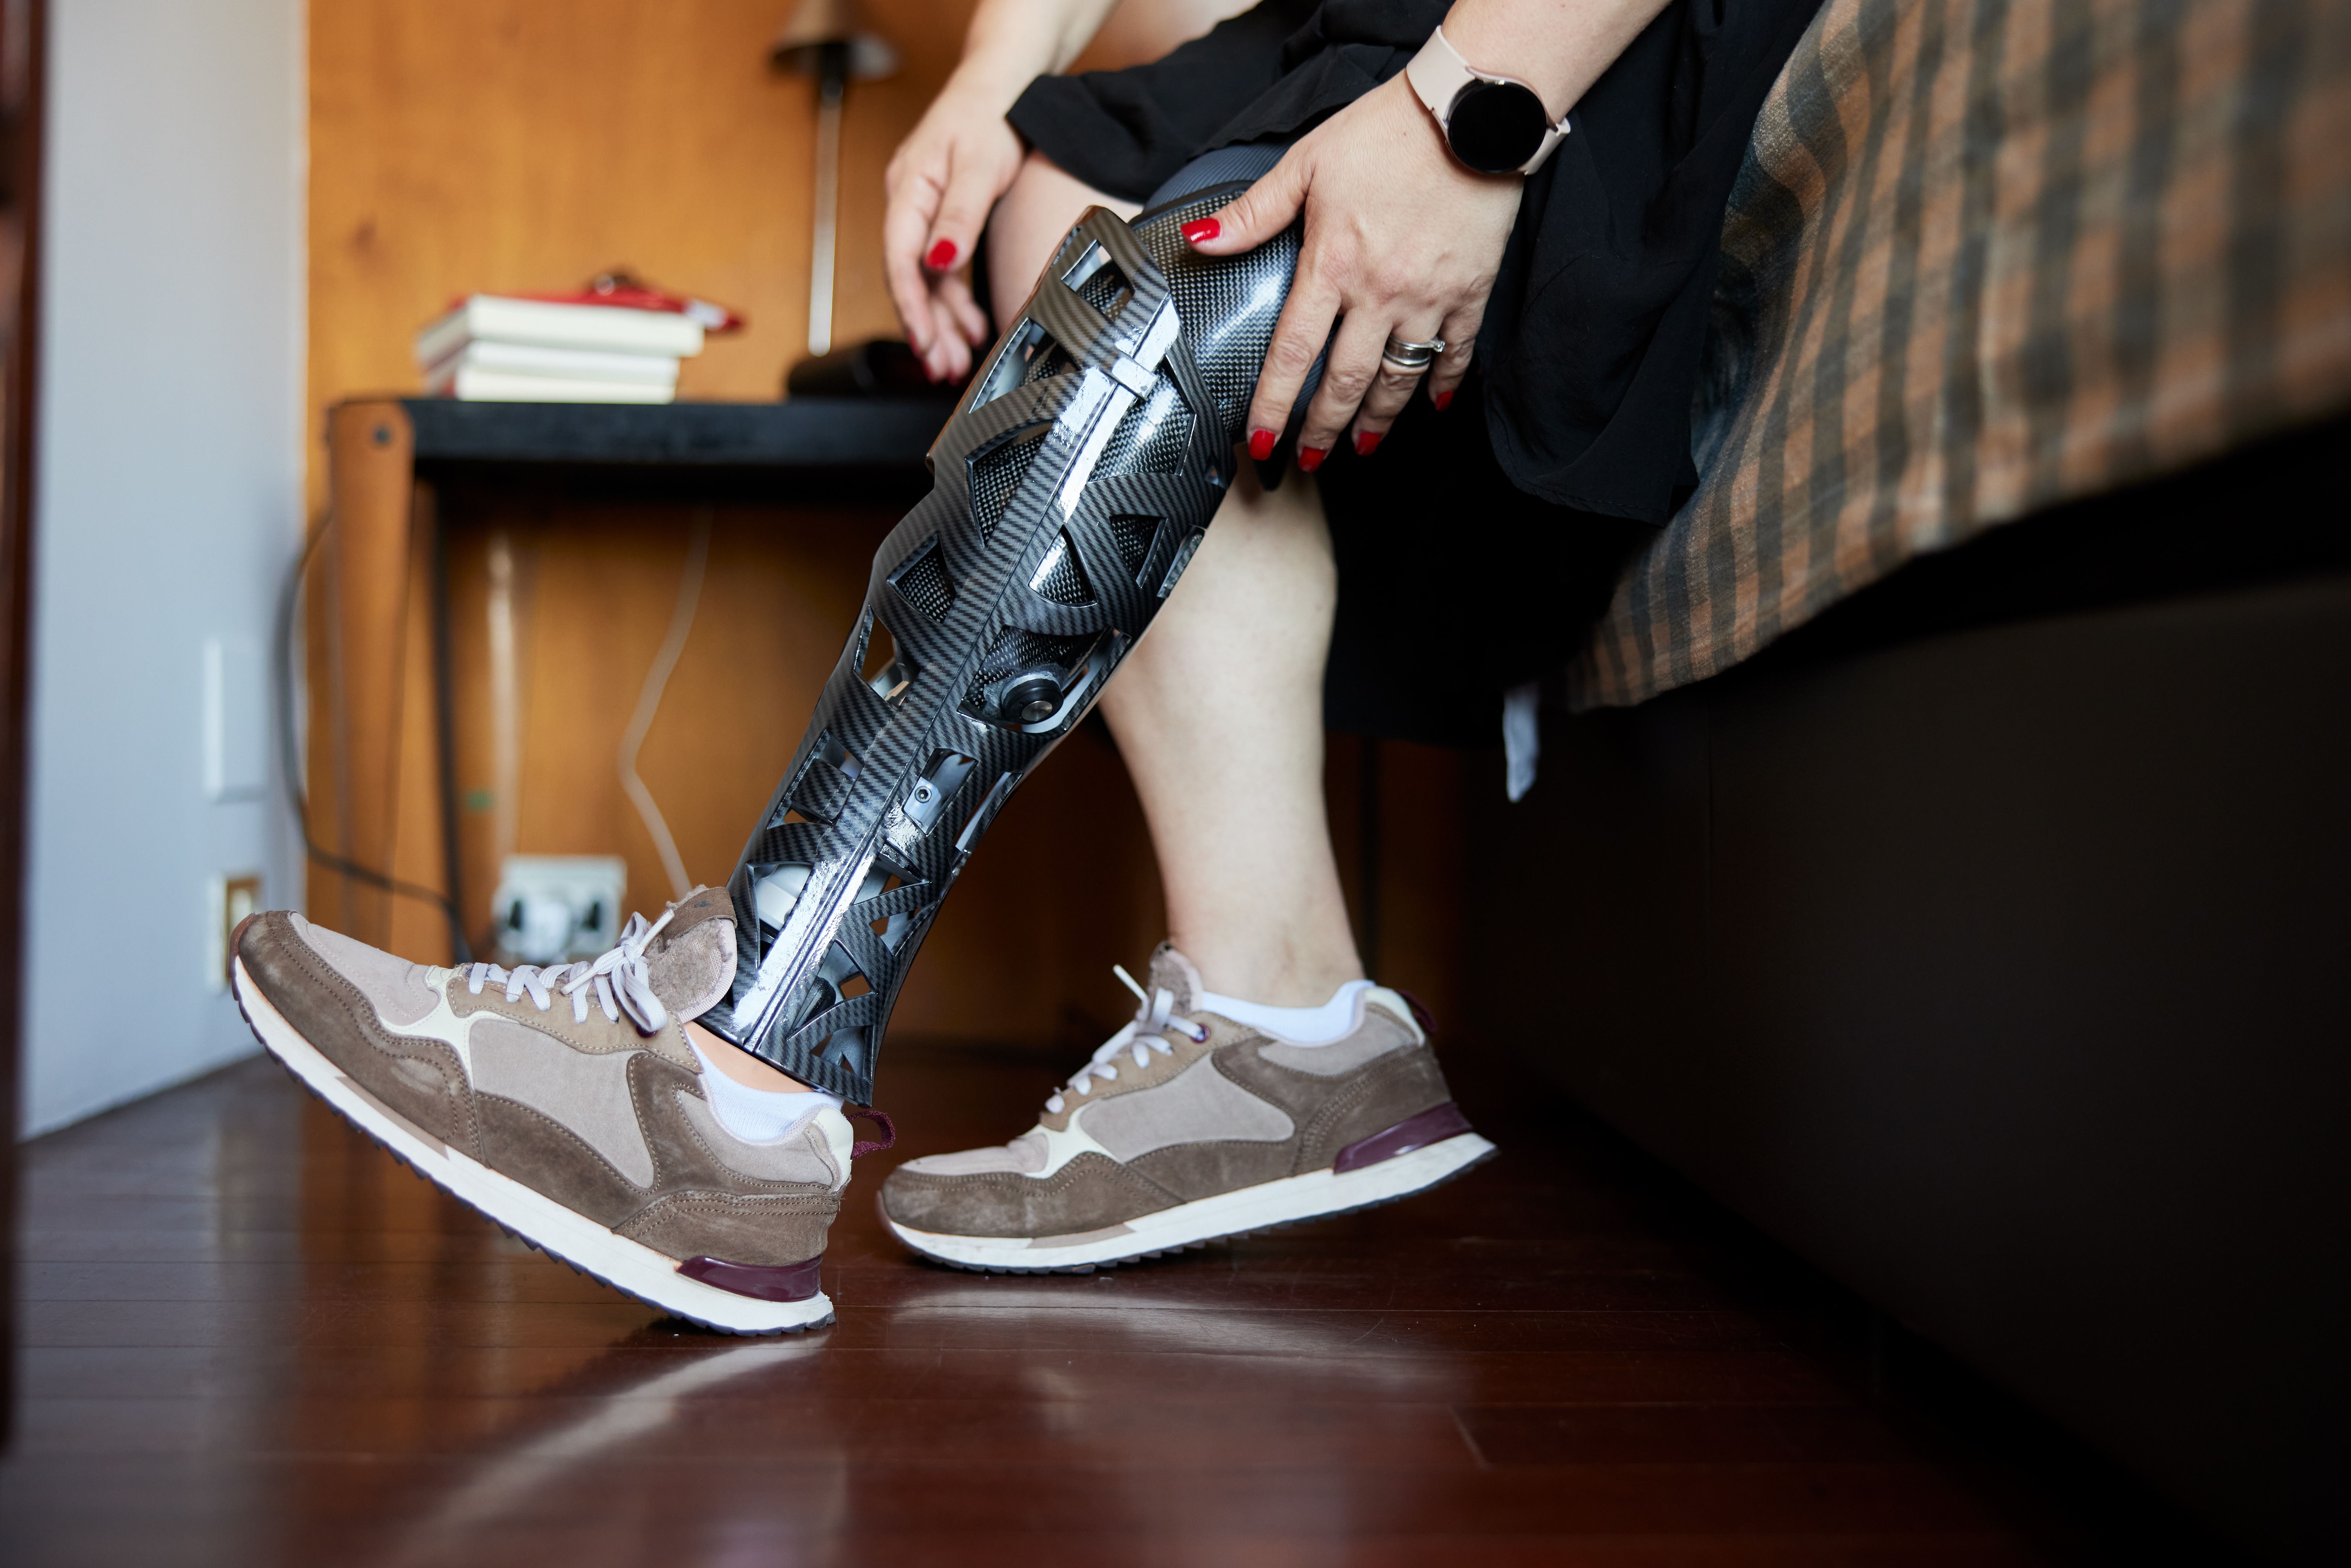 A person with a prosthetic leg | Source: Shutterstock